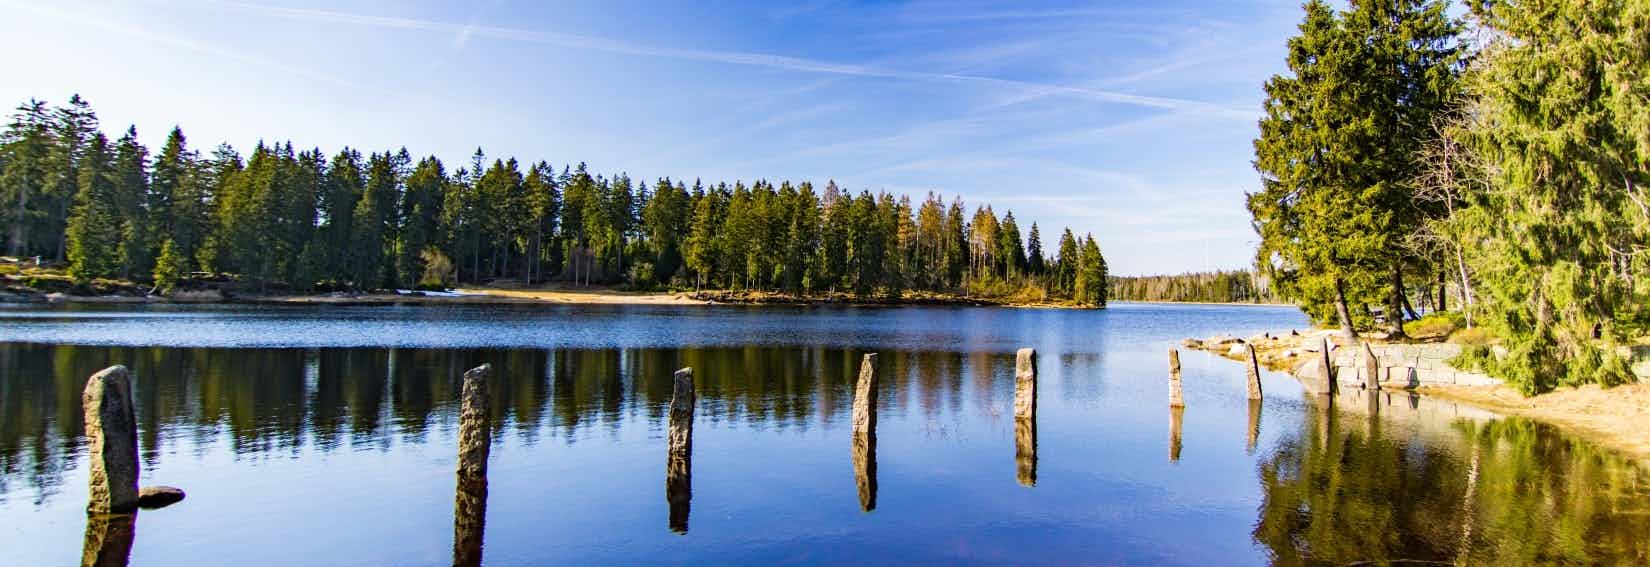 Camping am See im Harz